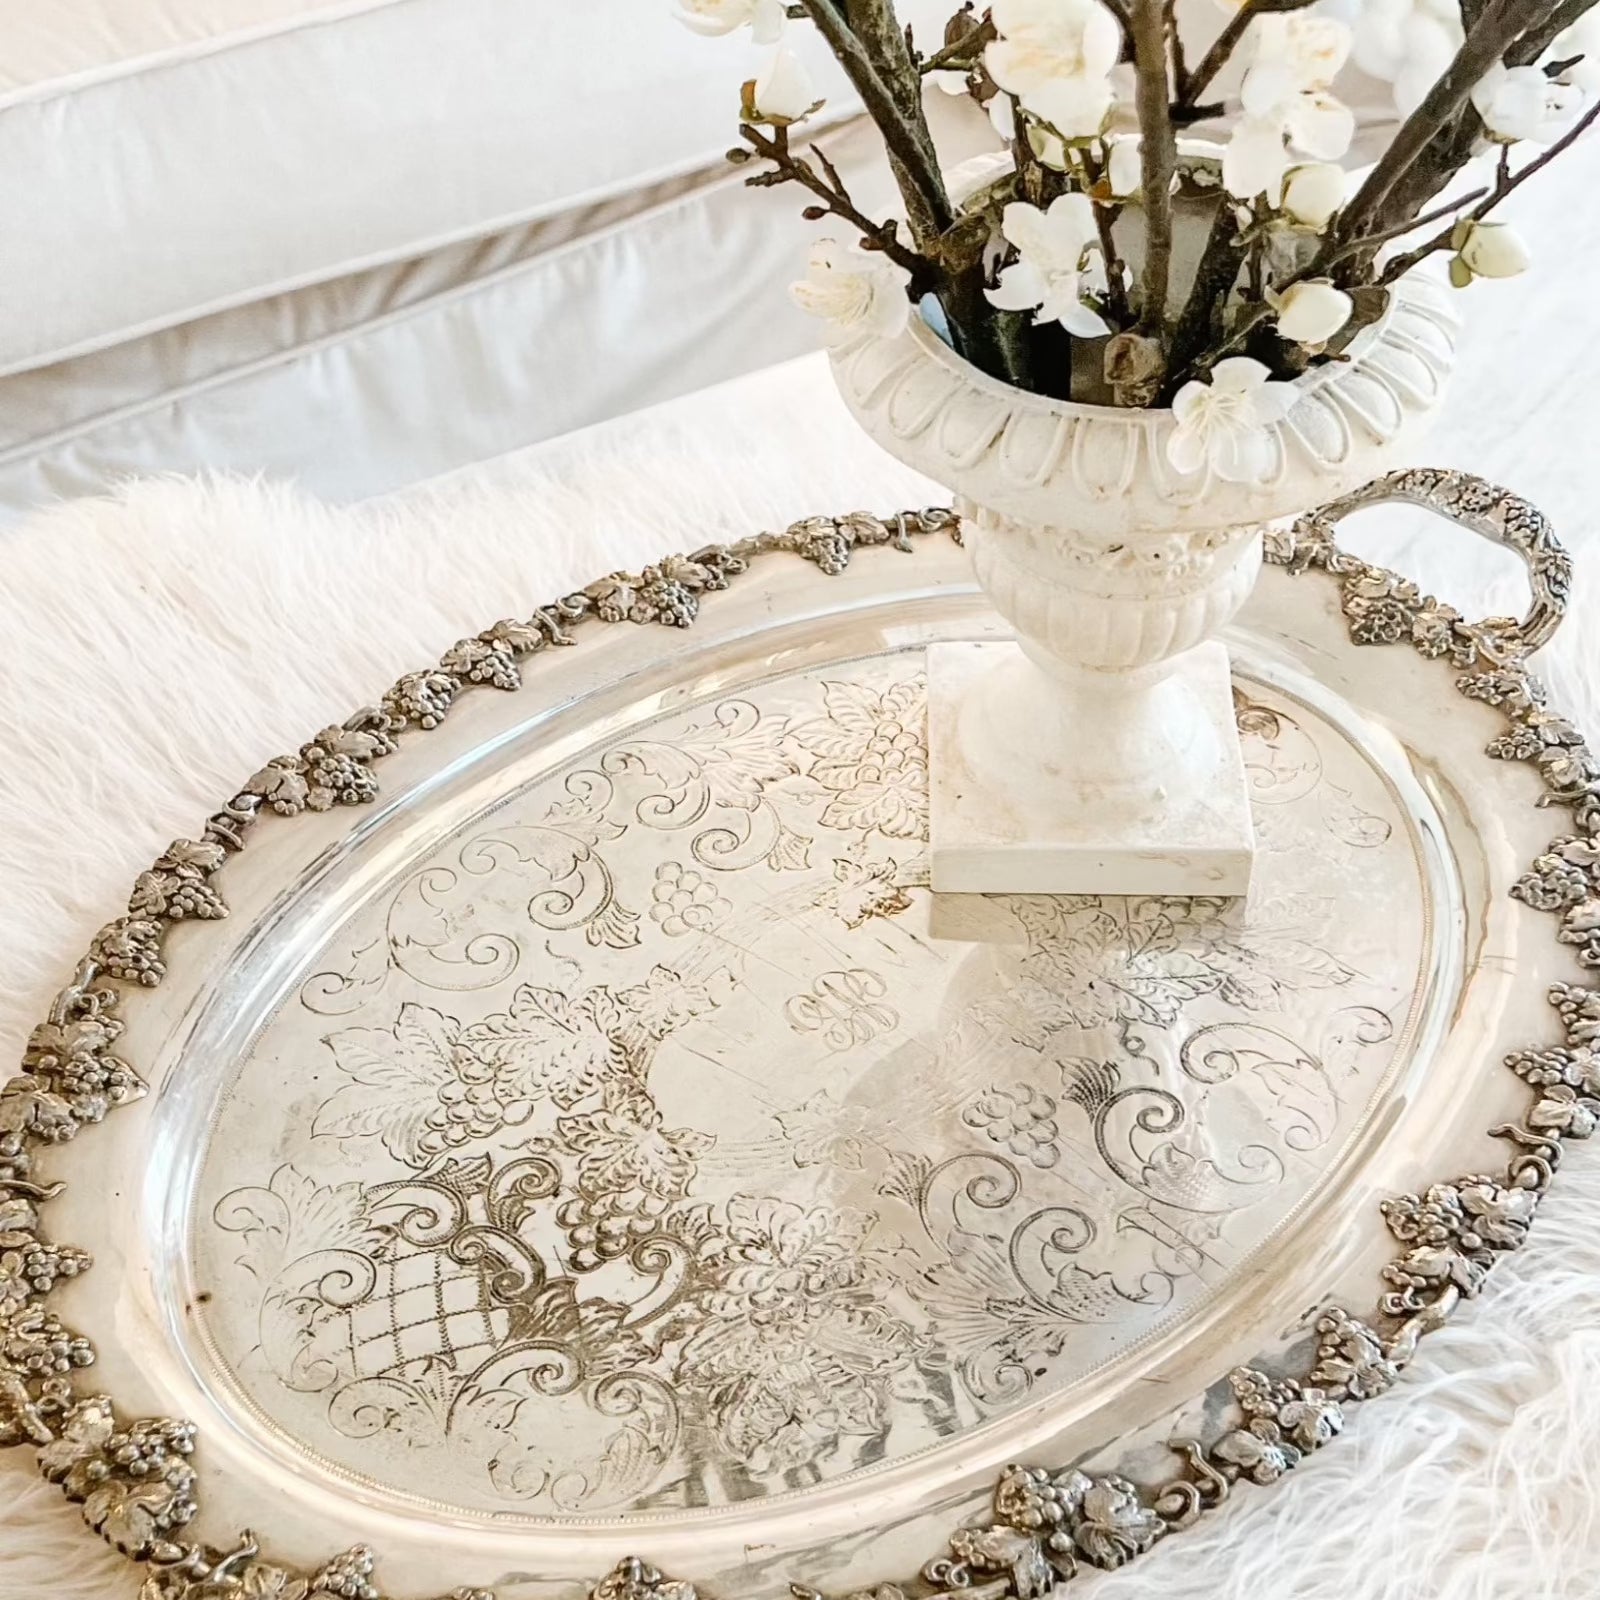 Antique floral wreath silverplated tray